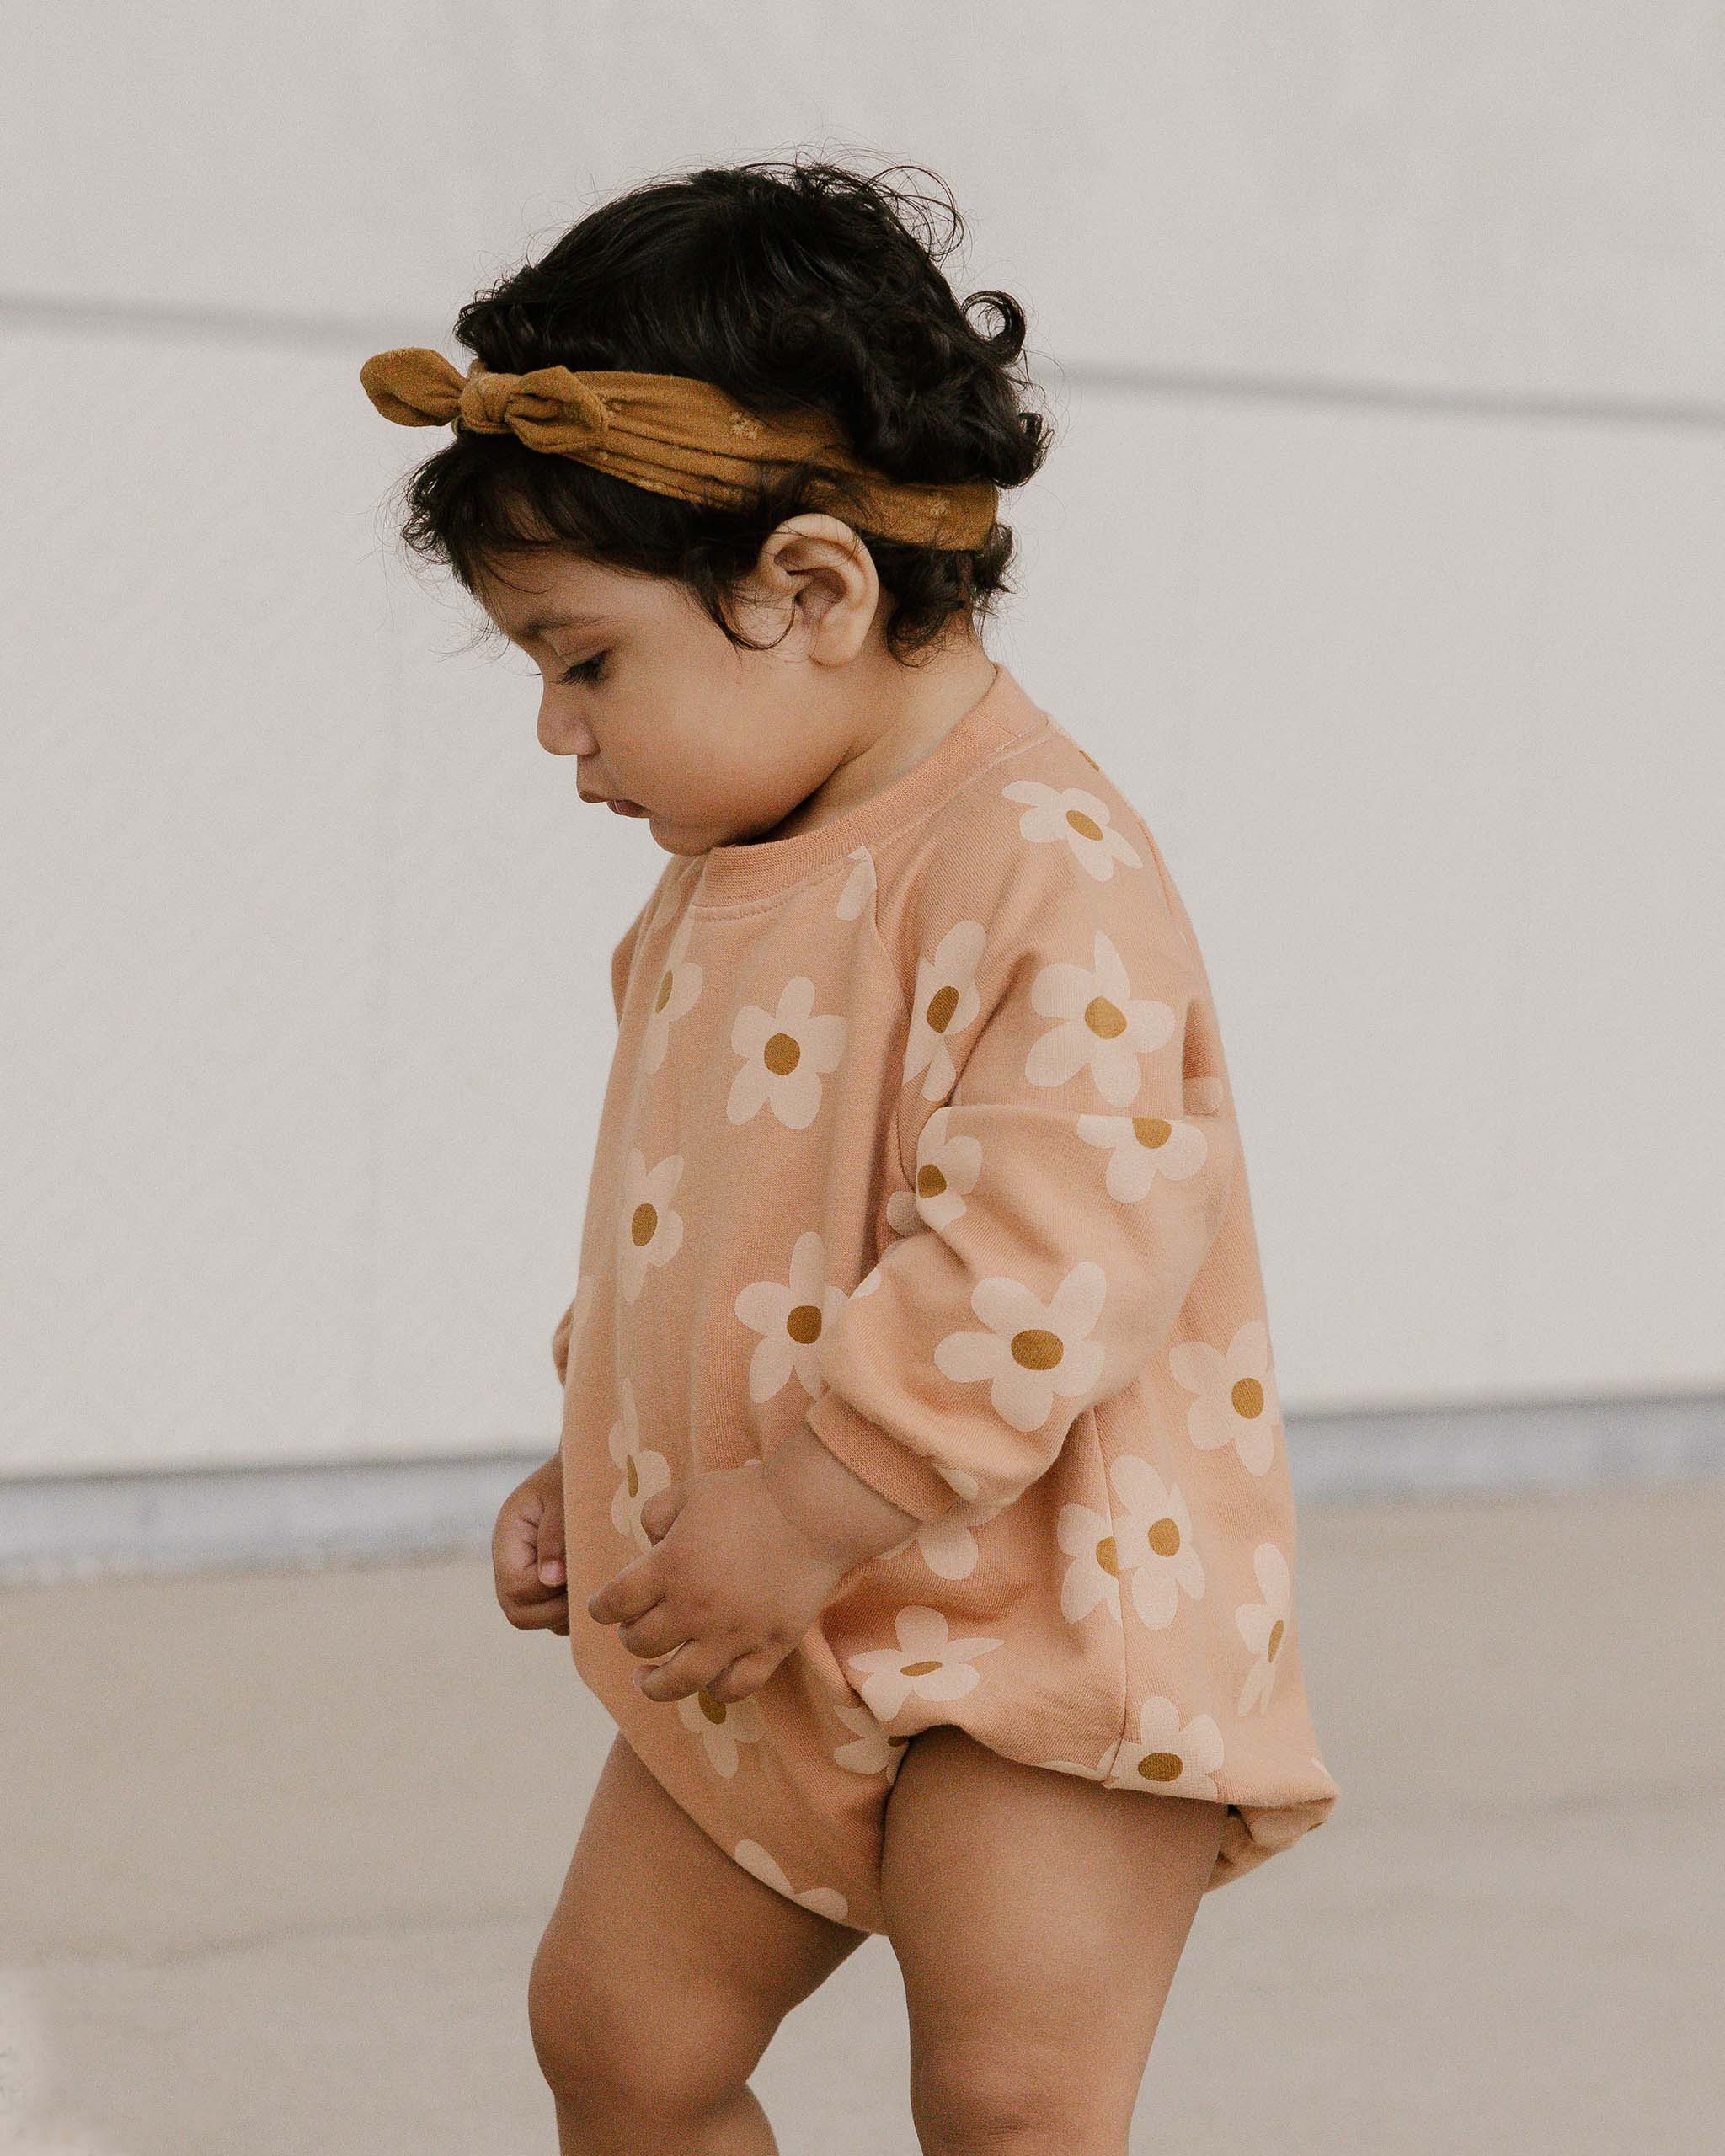 Crew Neck Romper || Melon Daisy - Rylee + Cru | Kids Clothes | Trendy Baby Clothes | Modern Infant Outfits |